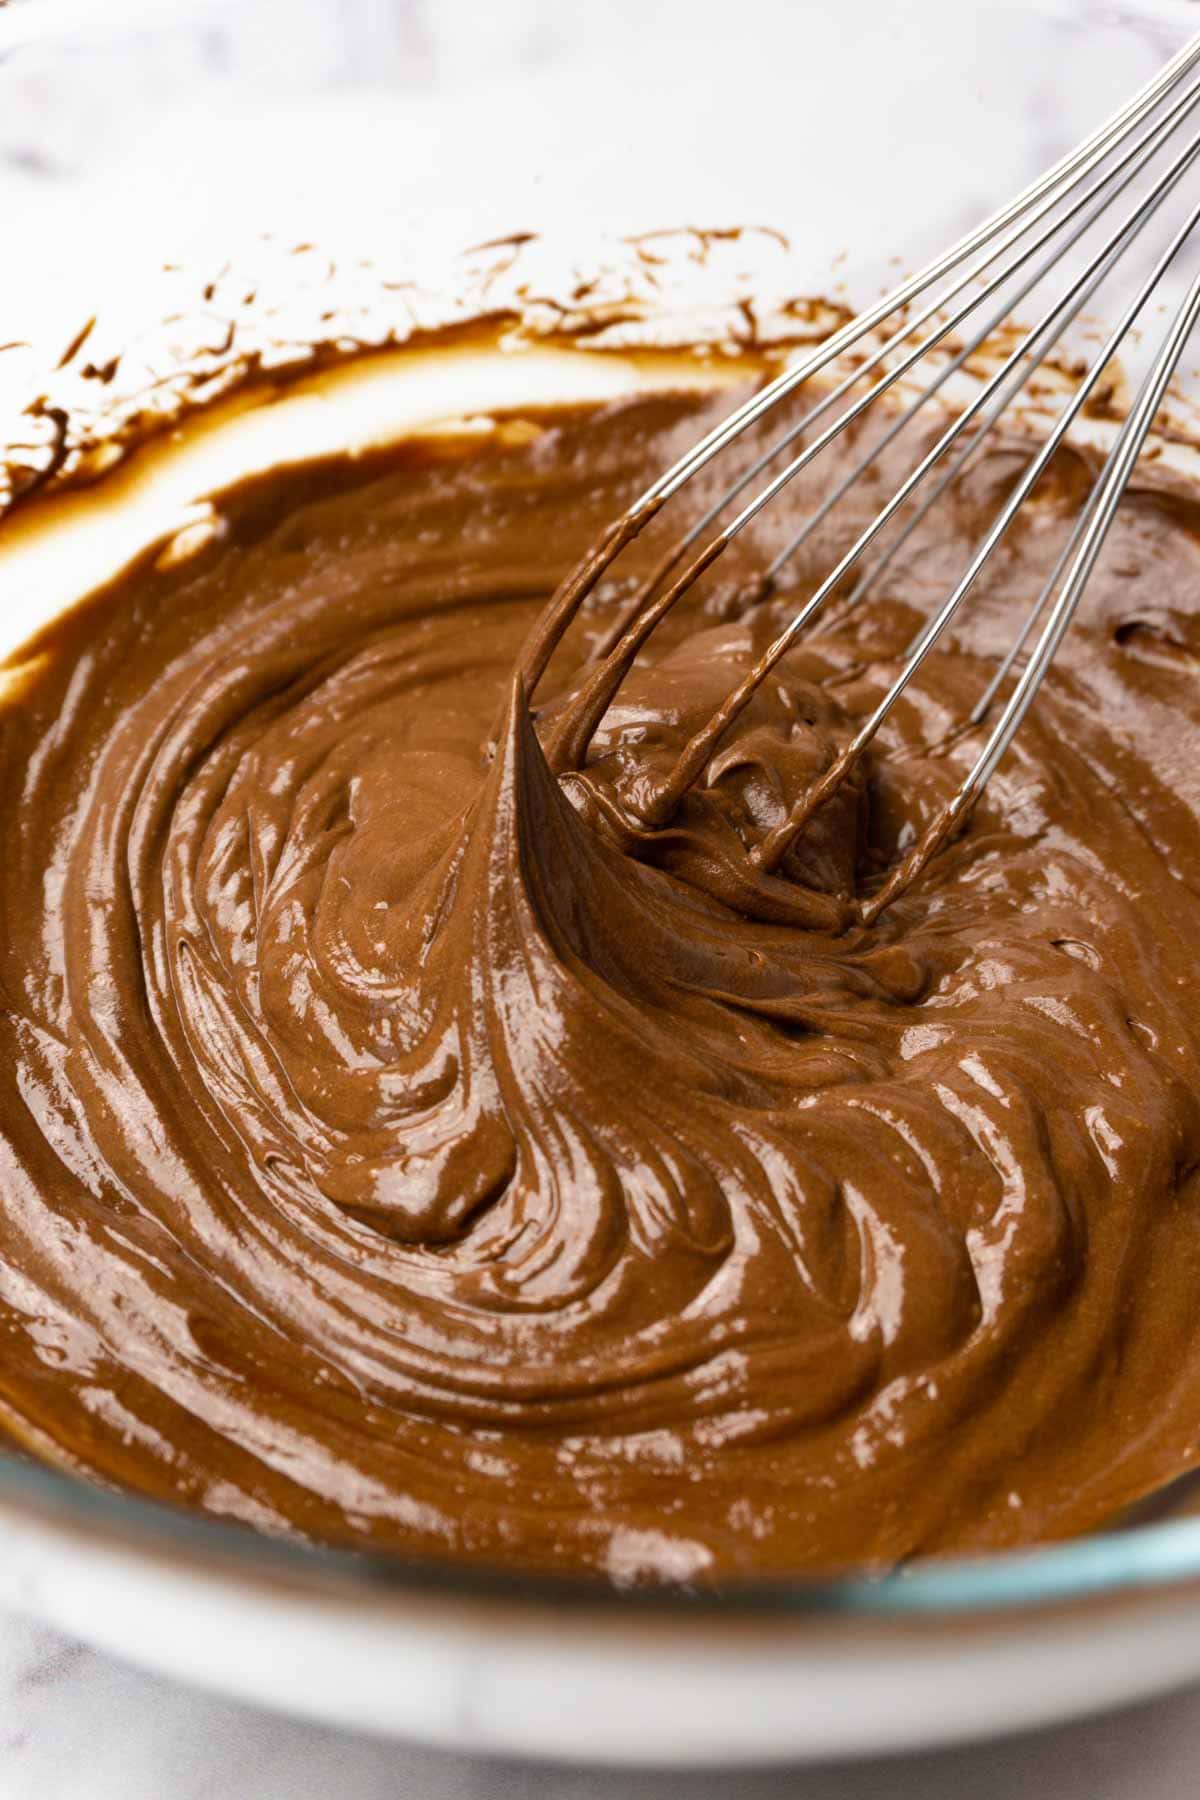 Whipped chocolate ganache in a bowl, a metal whisk is in the bowl.